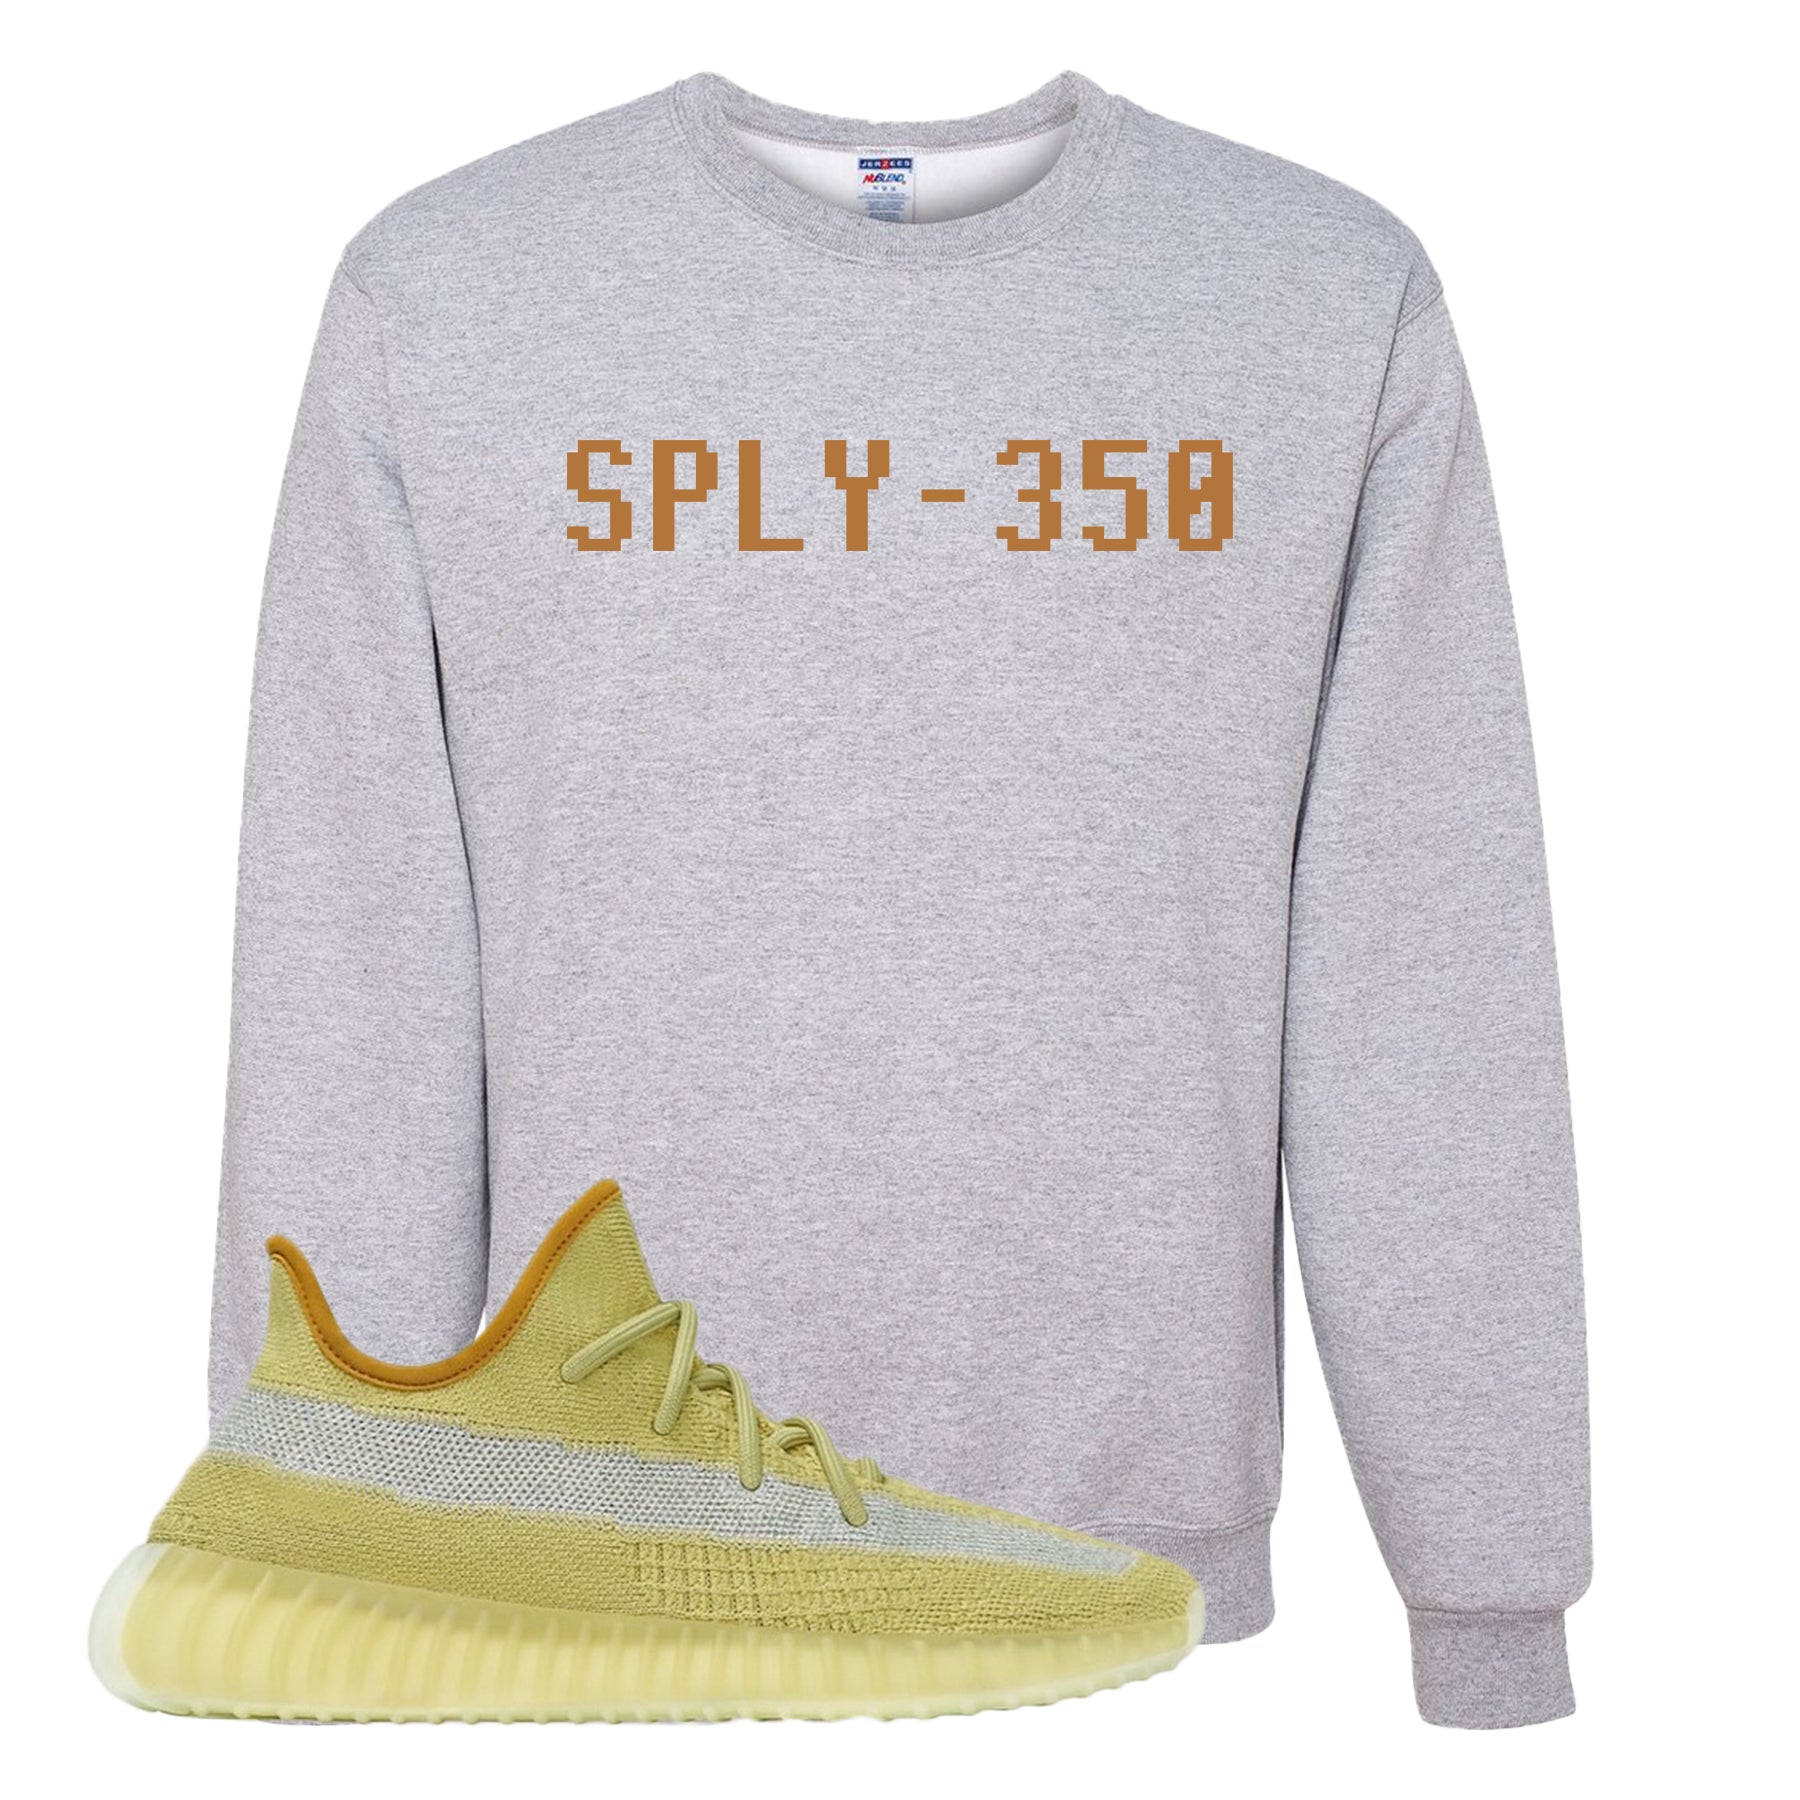 yeezy marsh outfit